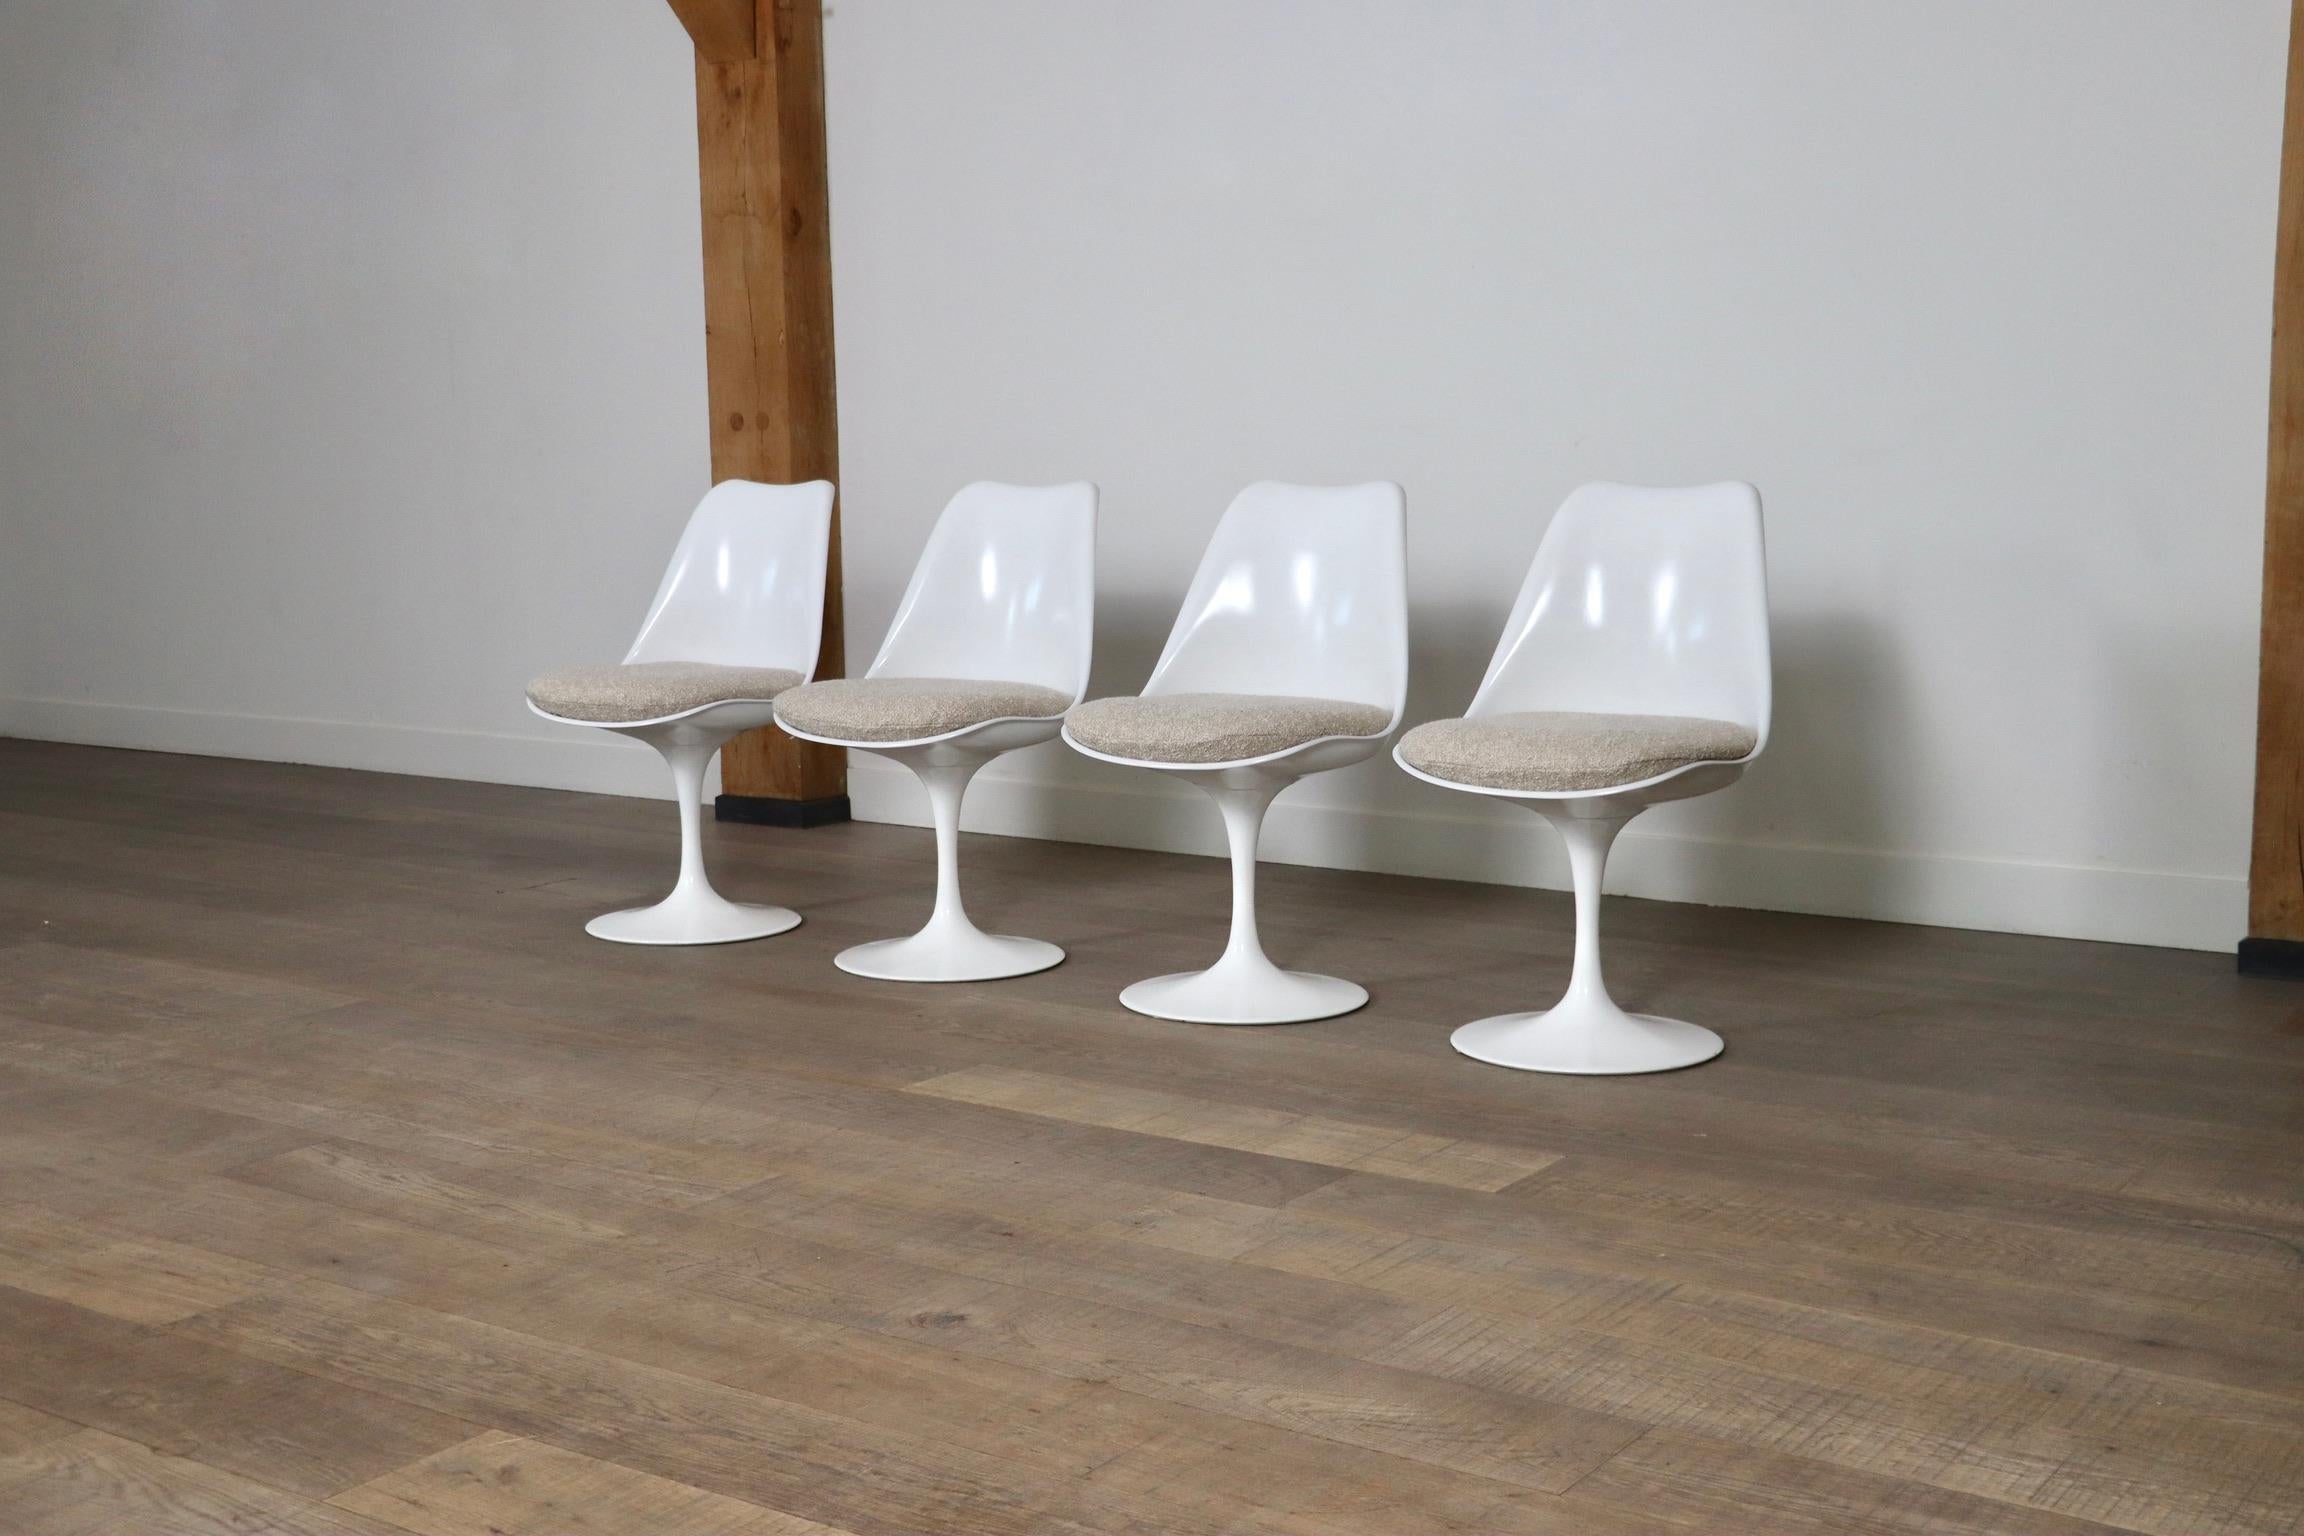 Amazing set of 4 Tulip chairs in beige bouclé by great designer Eero Saarinen, created in 1956. This particular set has four fixed chairs with newly upholstered seating cushions in a nice beige bouclé fabric. The covers are removable to clean them